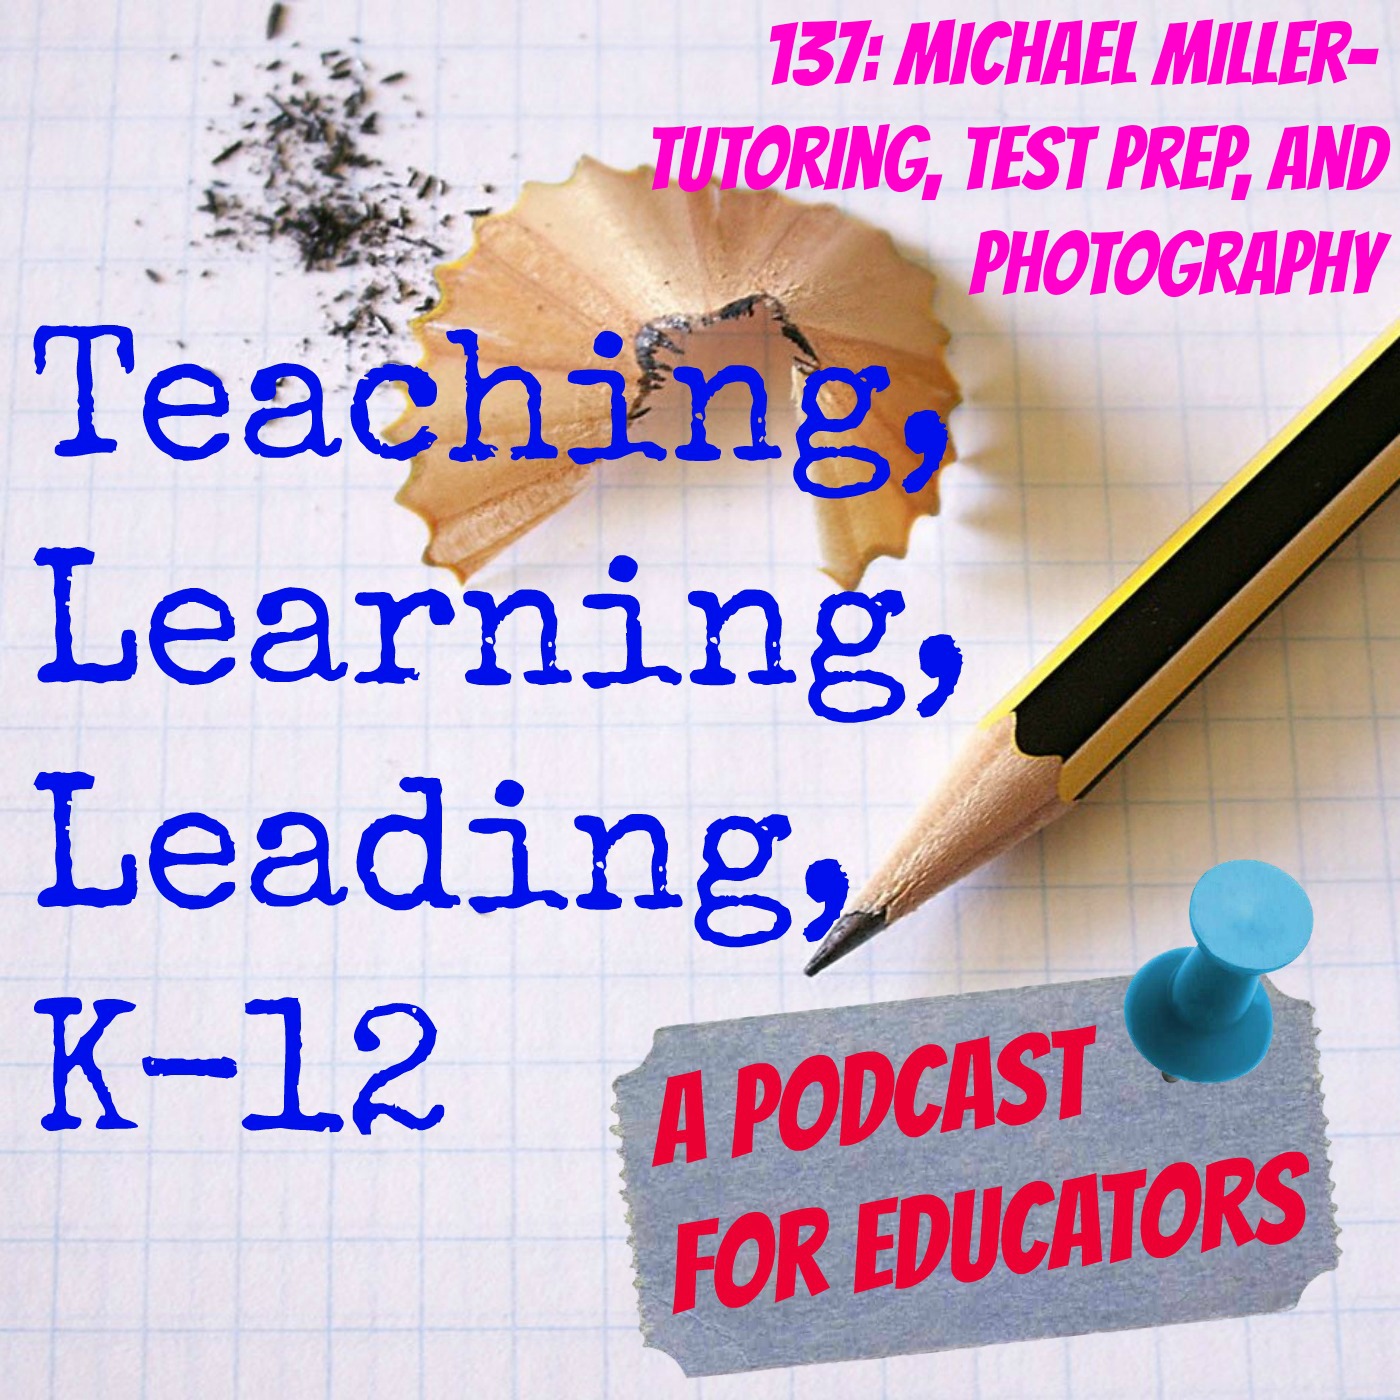 137: Michael Miller-Tutoring, Test Prep, and Photography Image